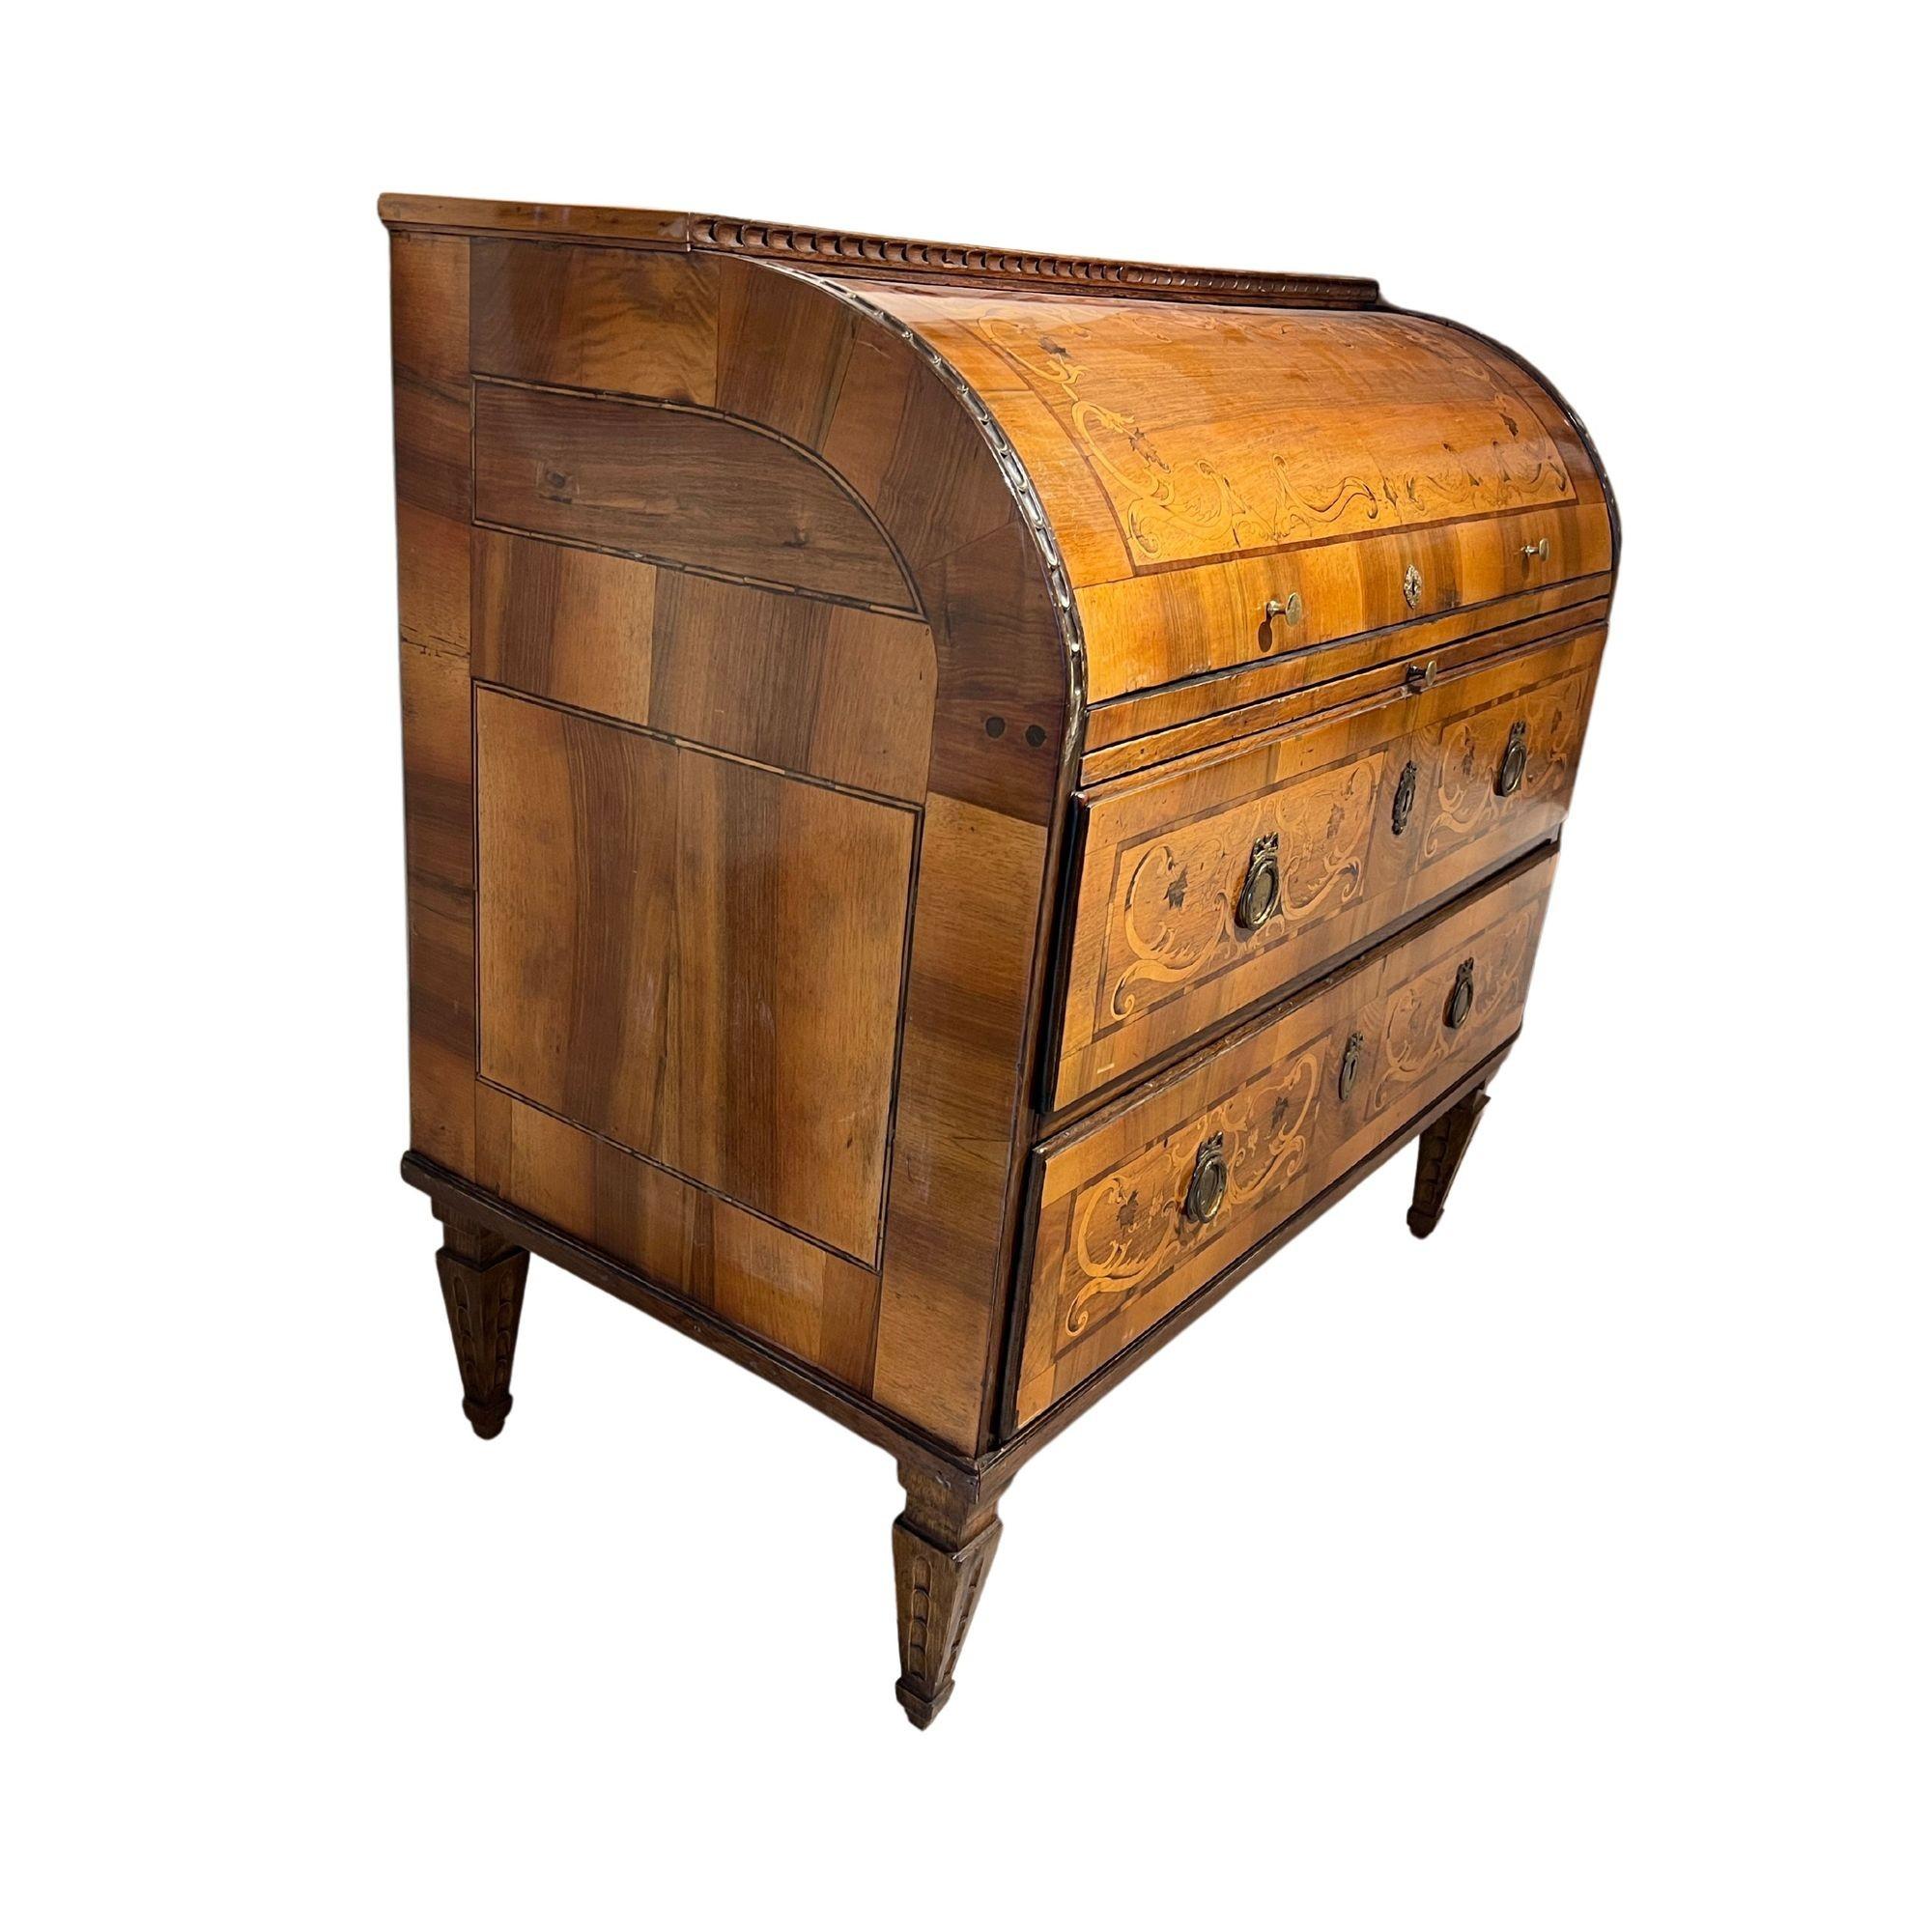 Josephine (after Josef II. / Habsburg monarchy) / period of Louis XVI. antique roll bureau or cylinder secretaire from Vienna around 1780.
 
Walnut inlaid with maple and precious woods. Shellac polished, good original condition with very nice